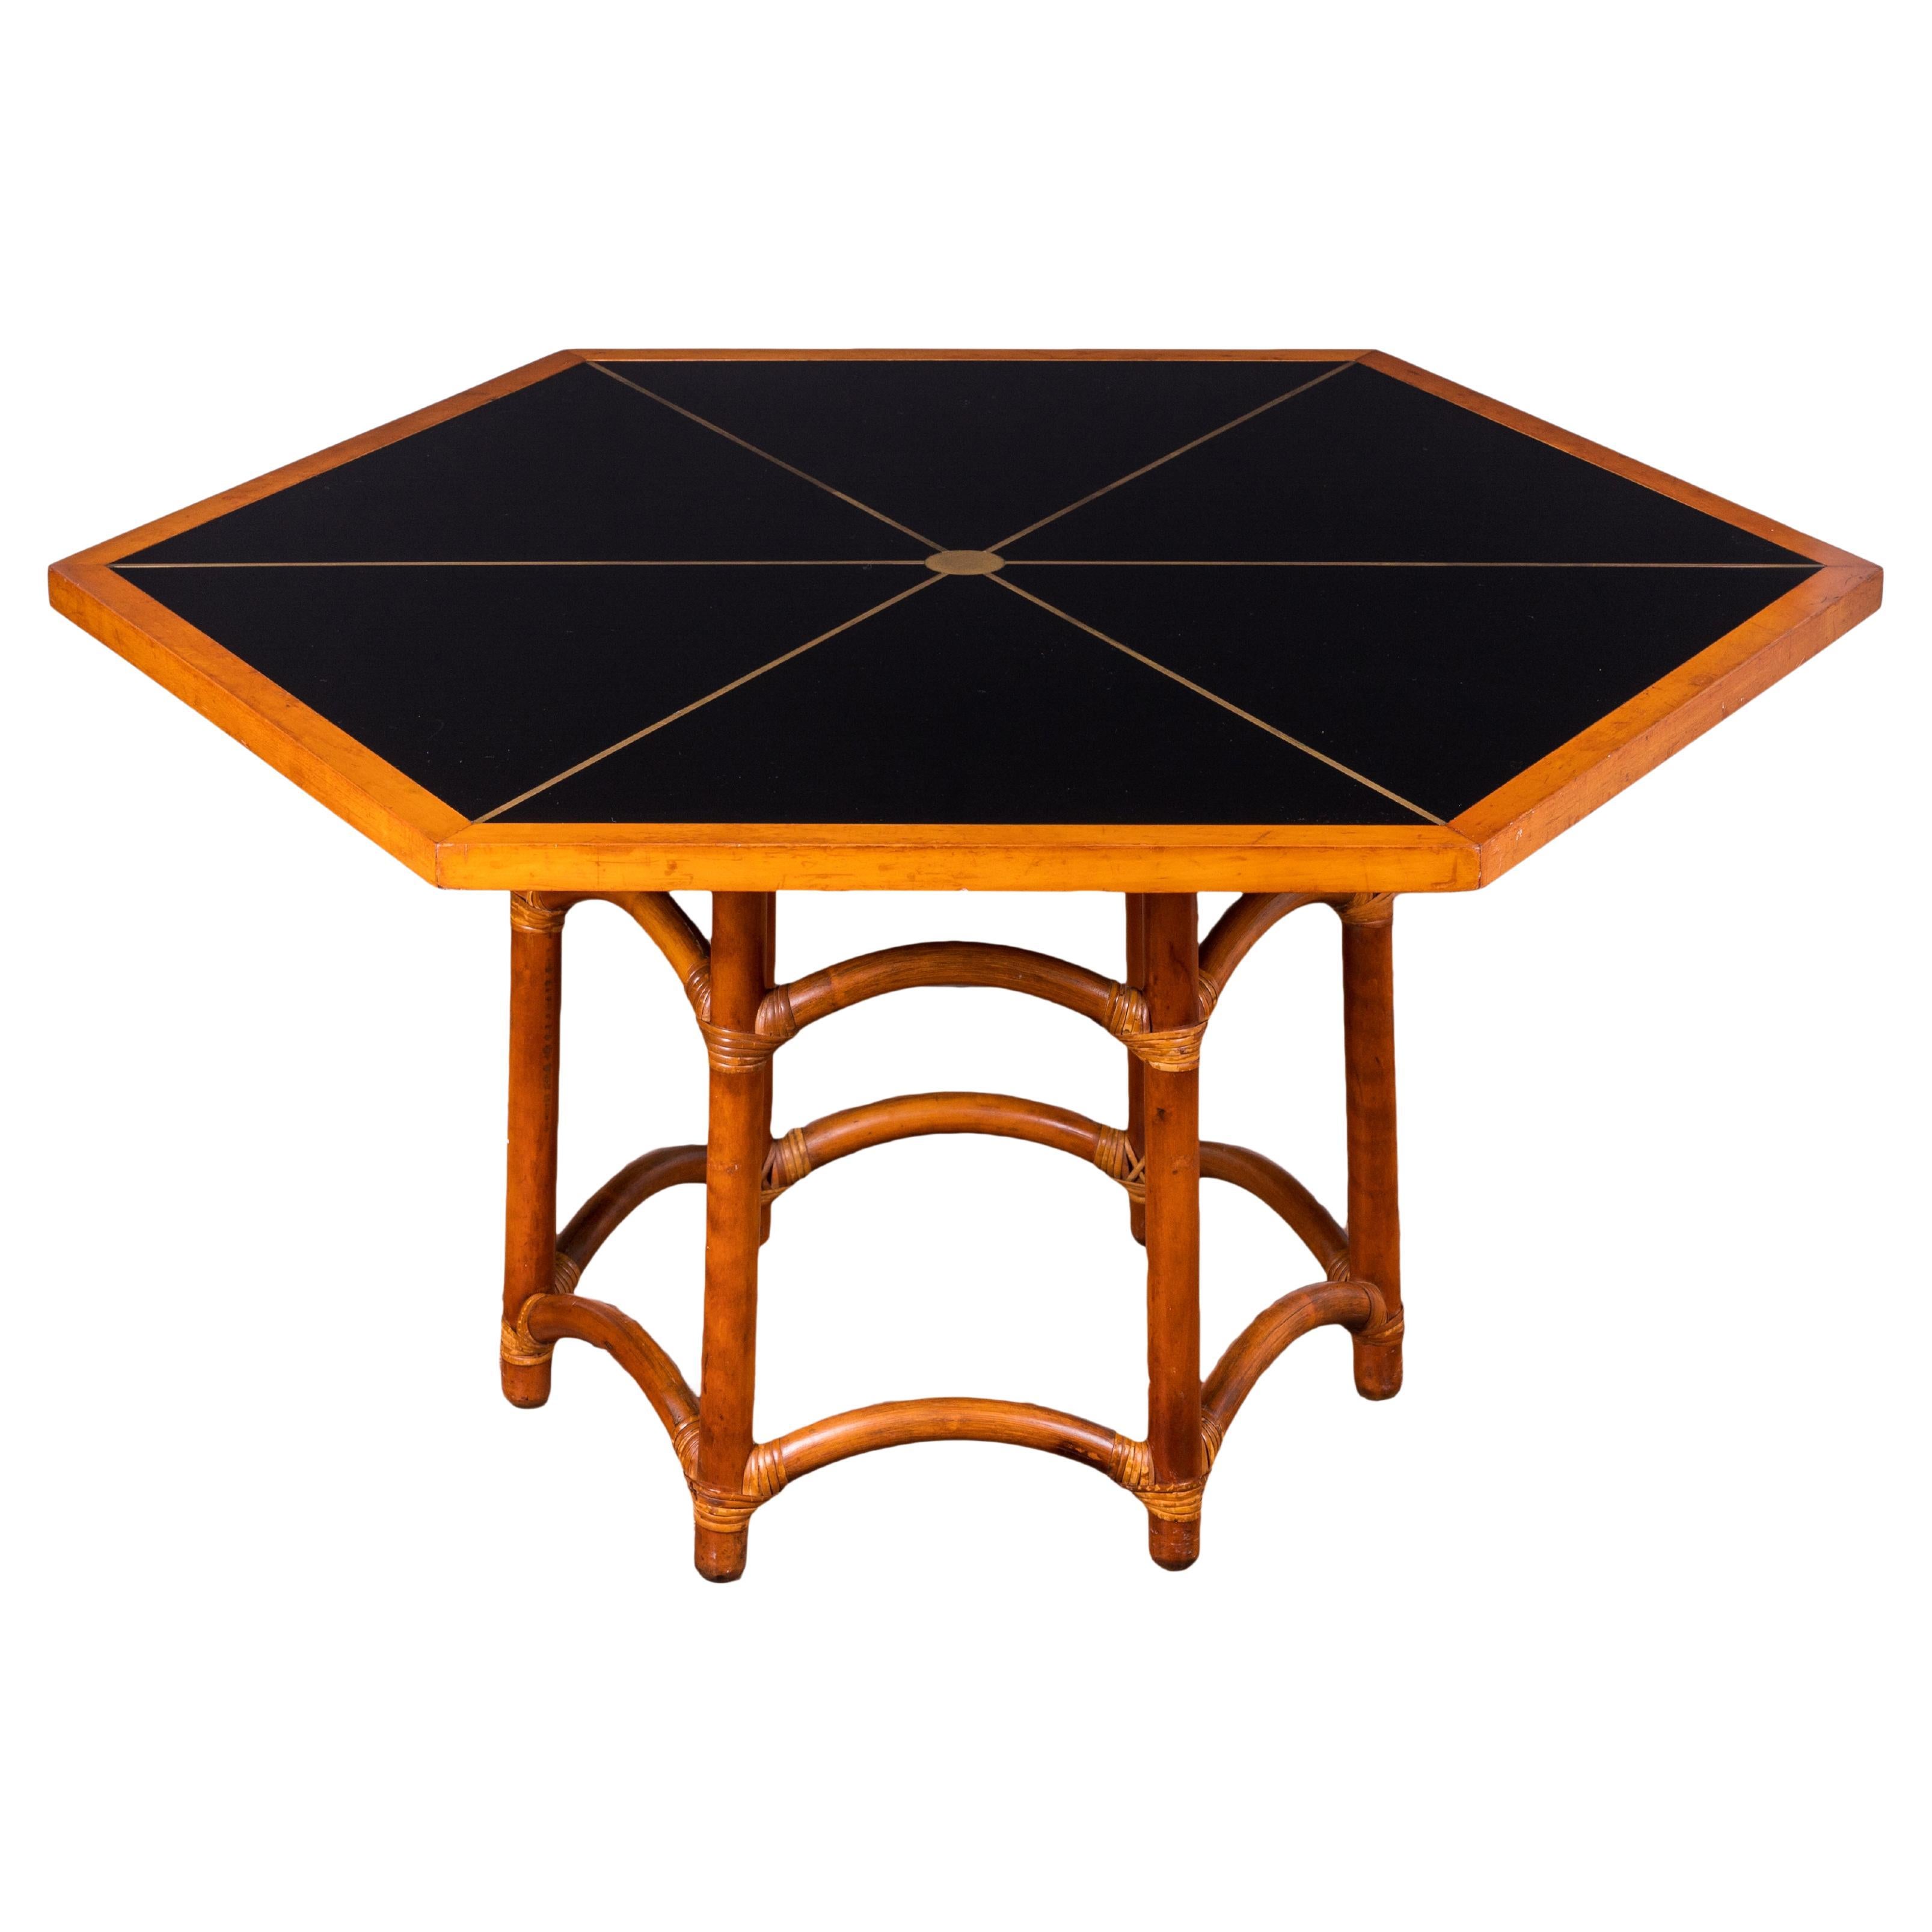 Parzinger for Willow & Reed Game Table, c.1955